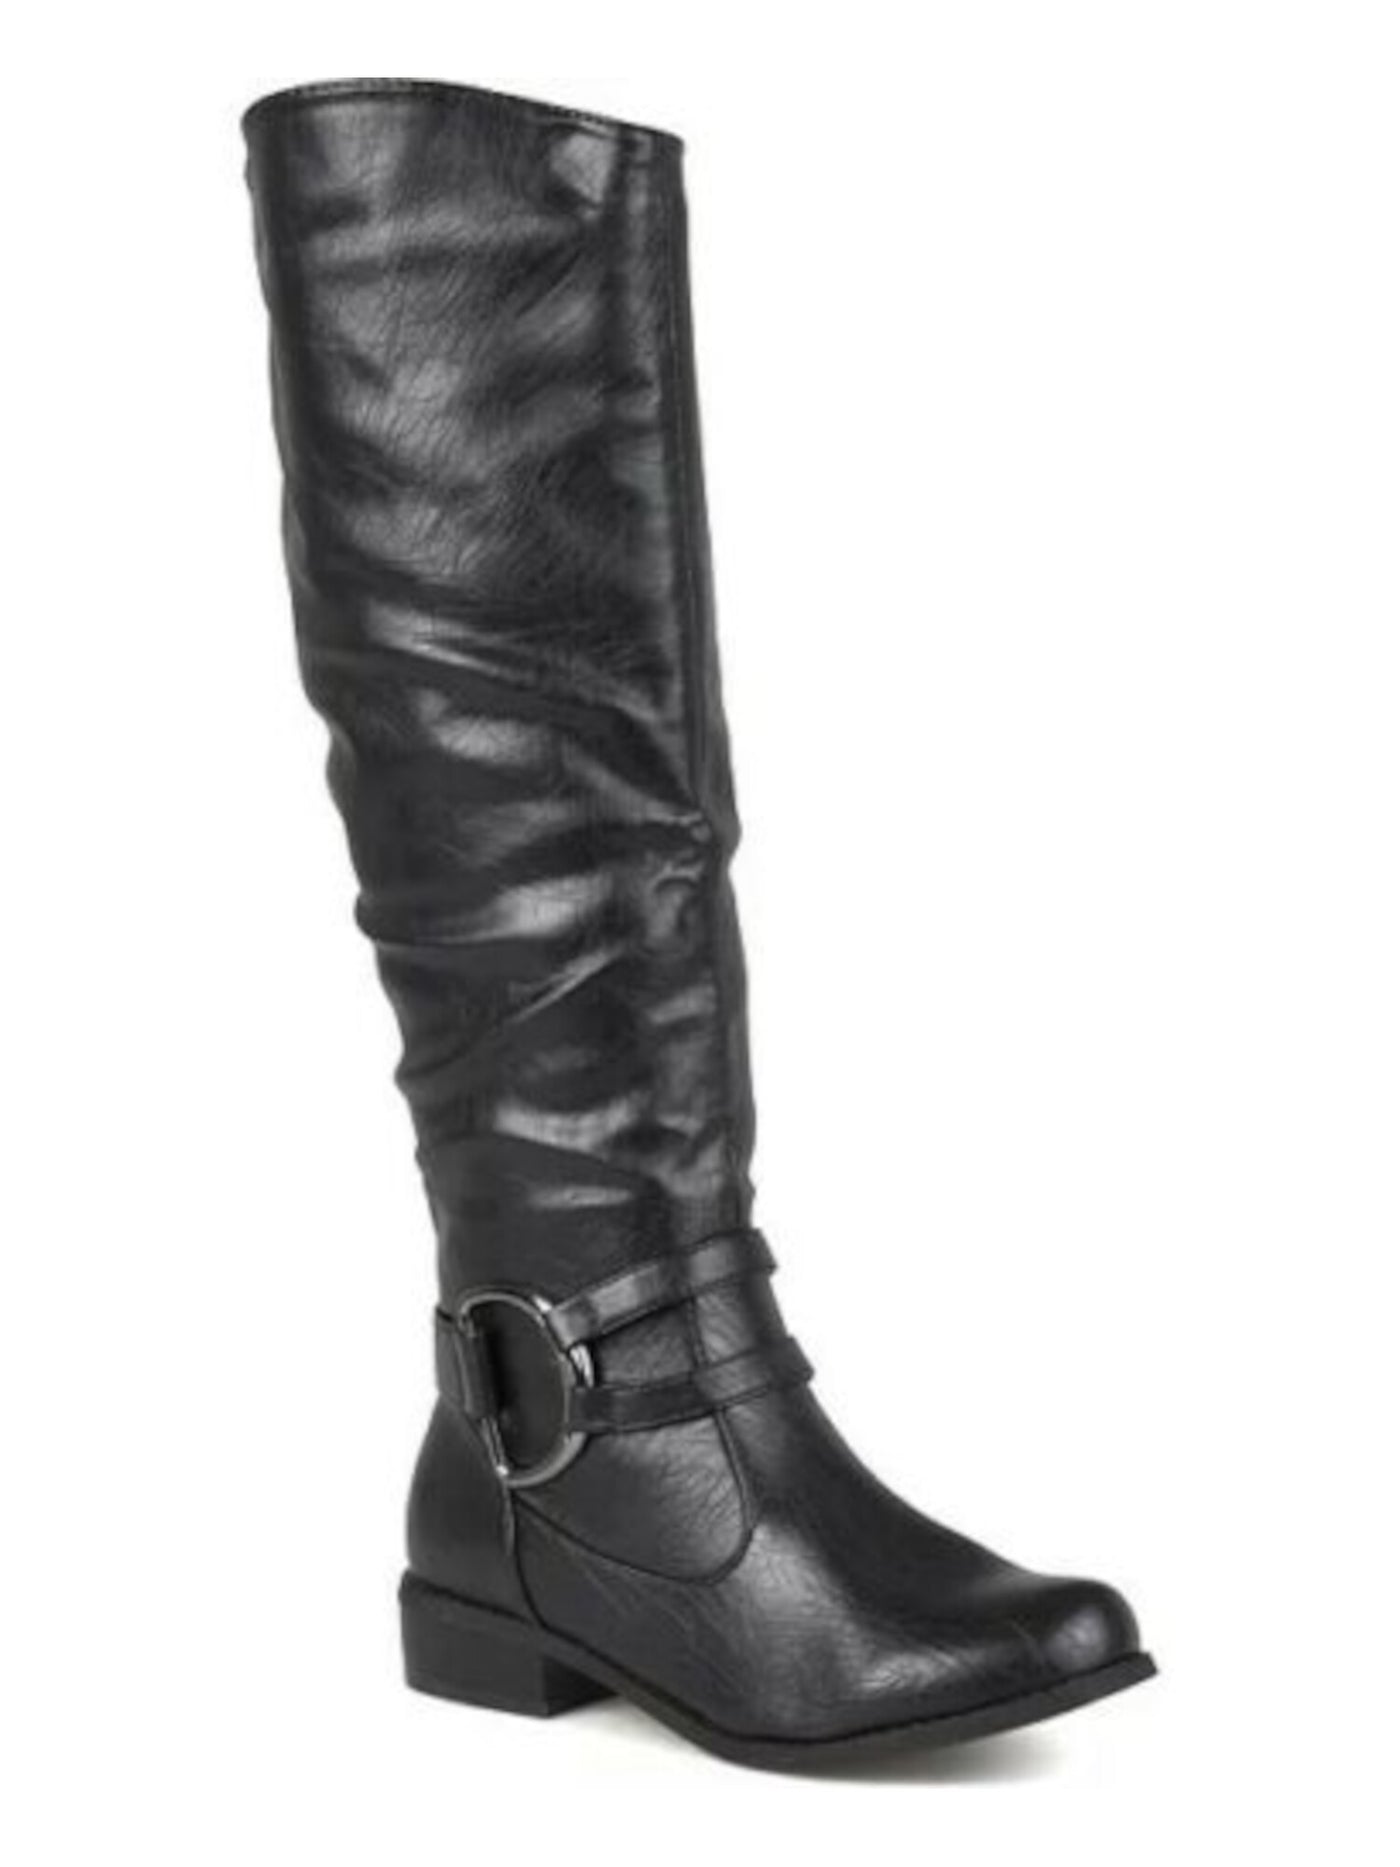 JOURNEE COLLECTION Womens Black D-Ring Accent Comfort Charming Round Toe Block Heel Zip-Up Riding Boot 9.5 M WC